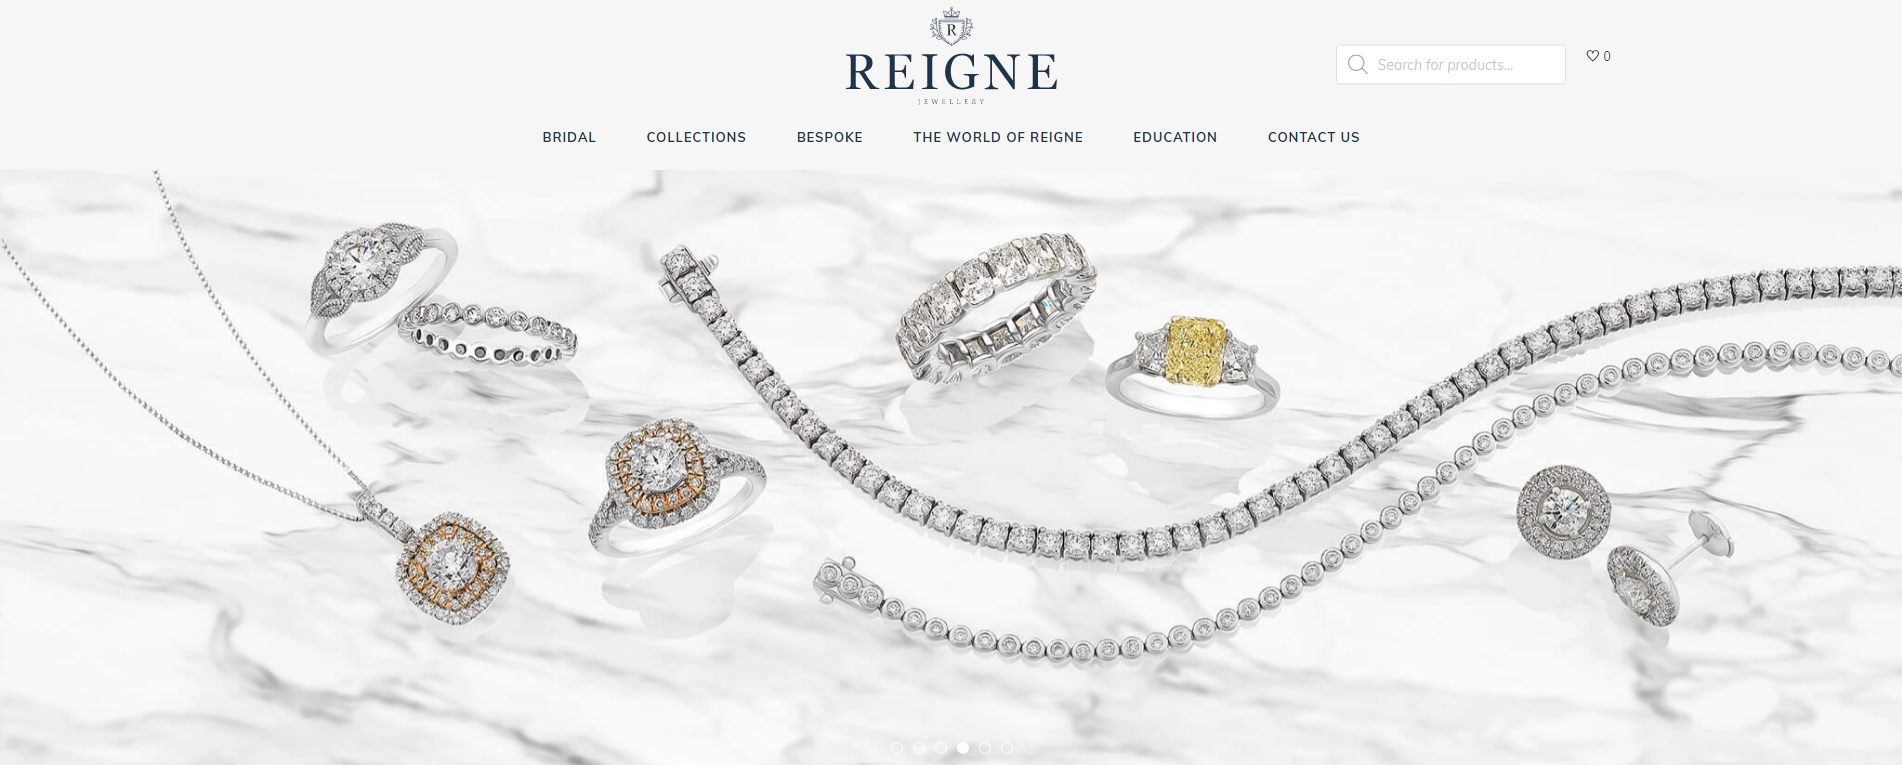 reigne jewellery engagement rings & wedding band shop melbourne